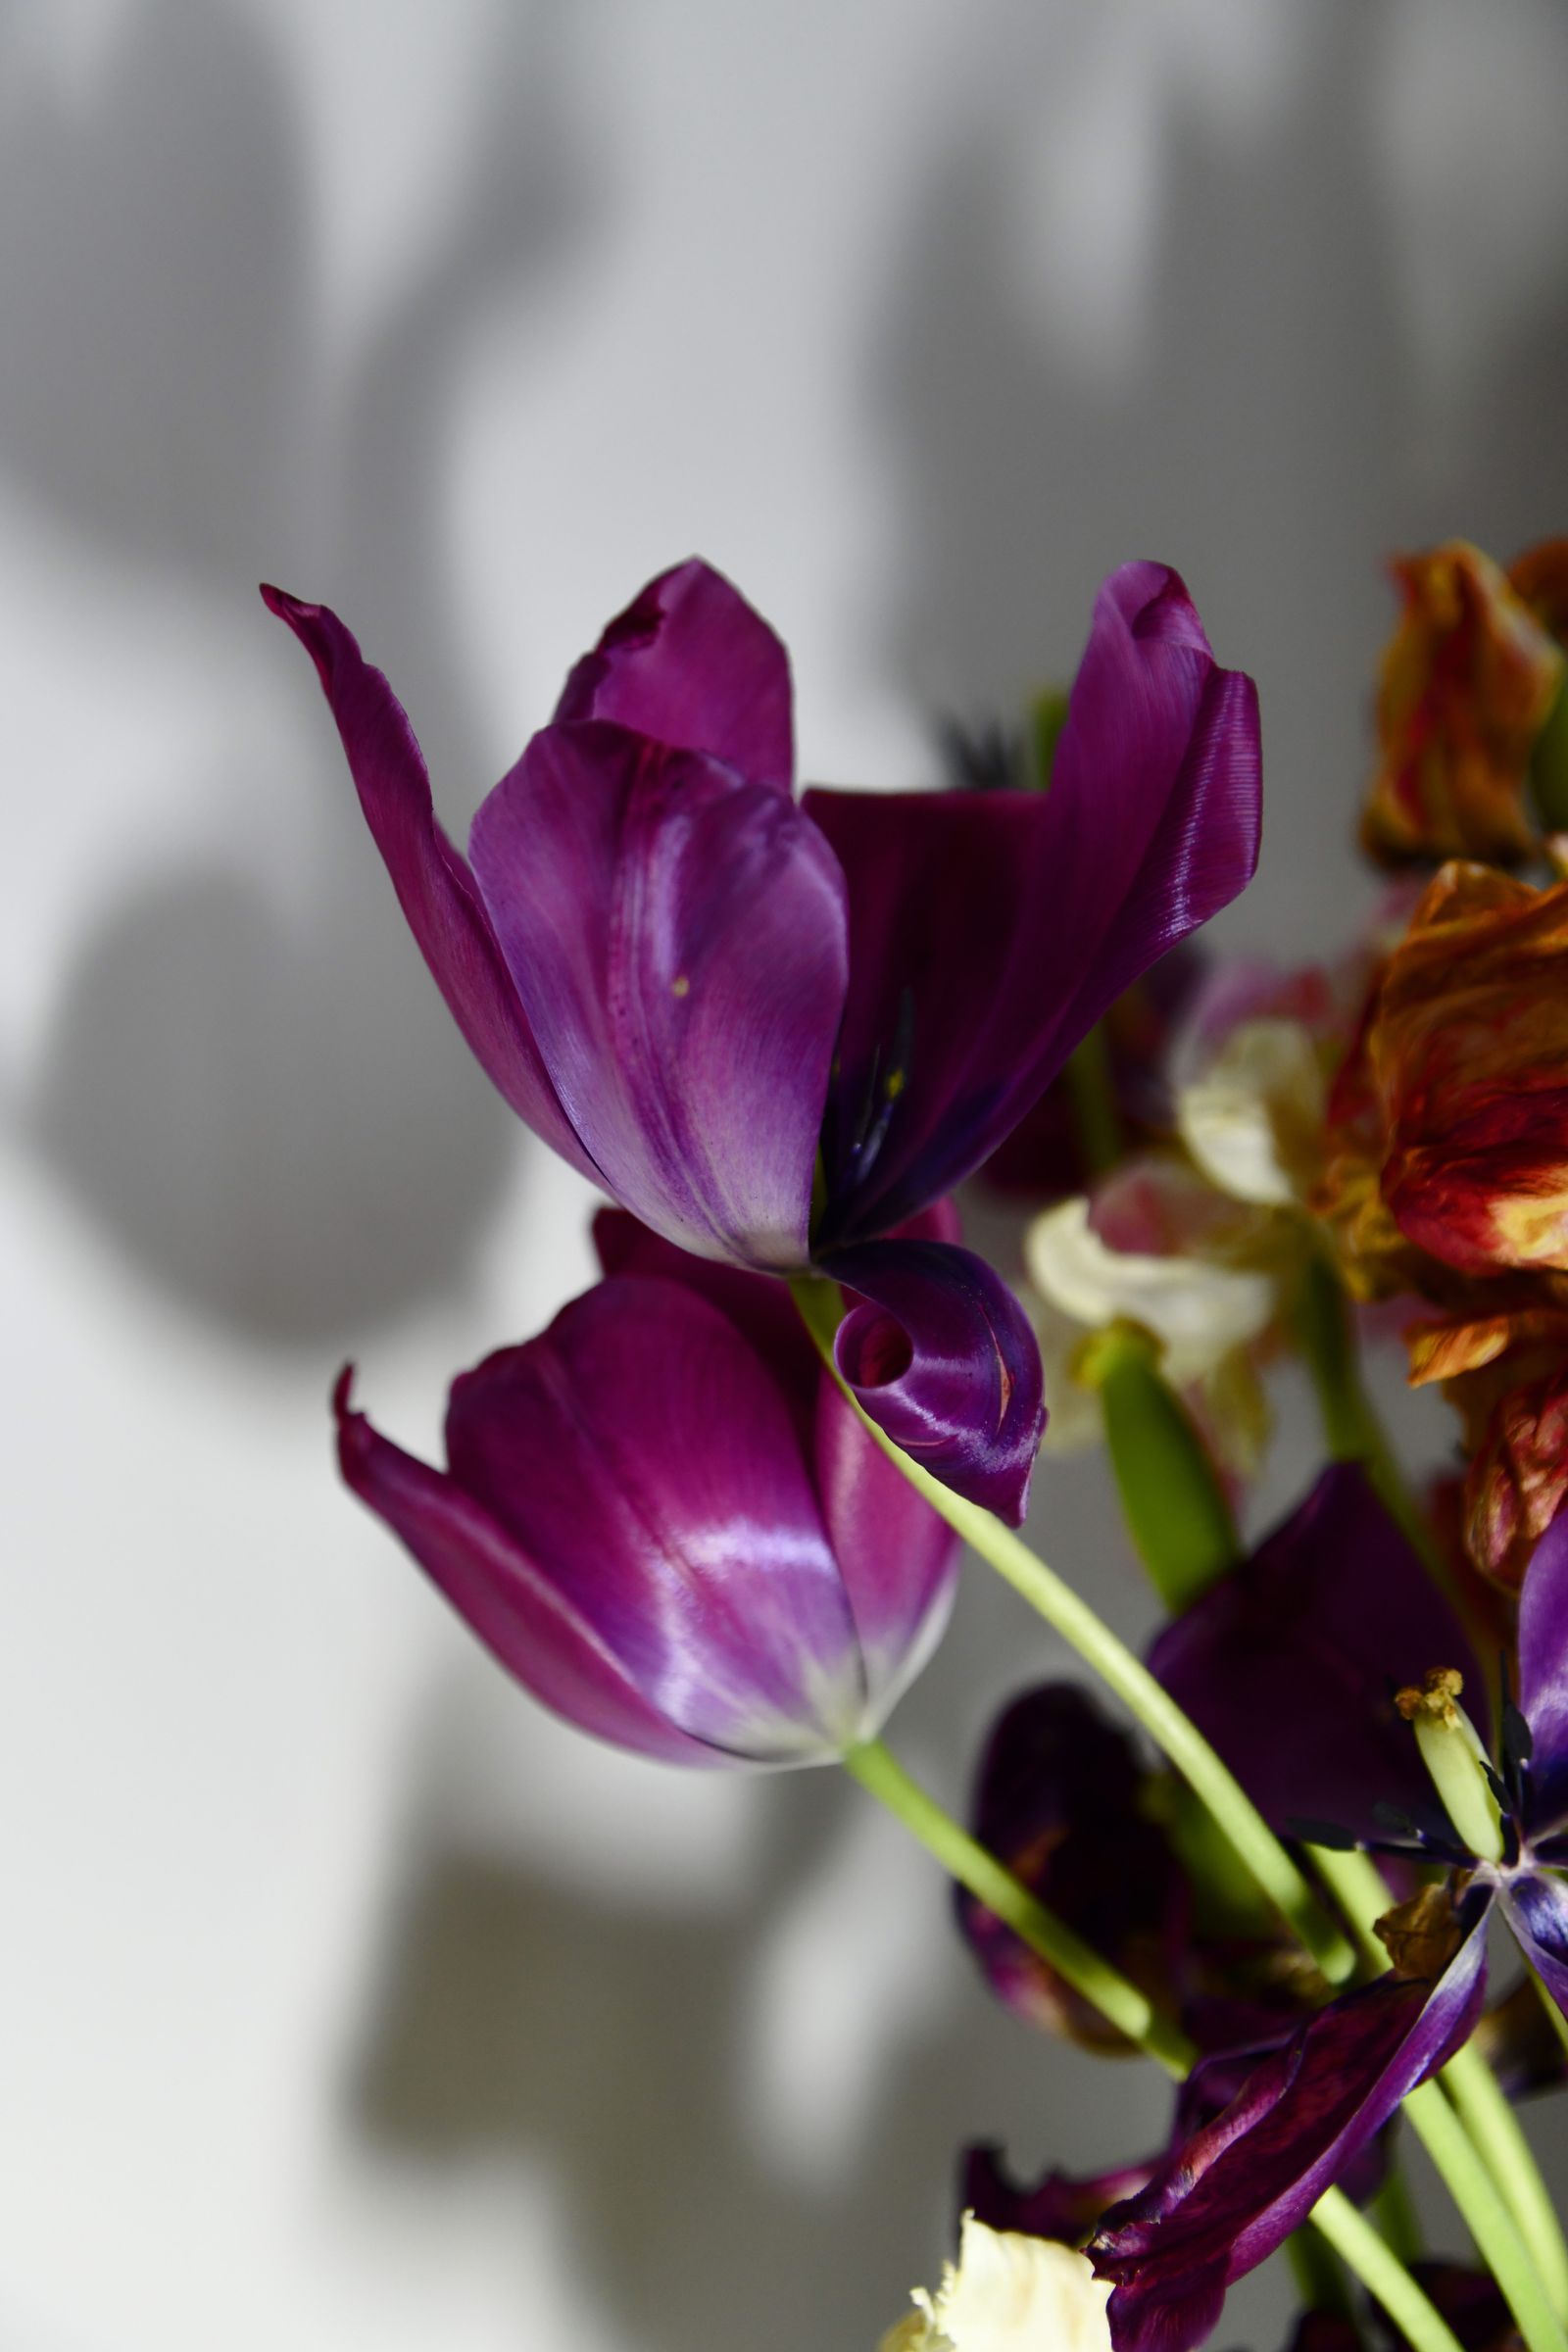 © Elena Bandurka - Image from the Tulips from my garden photography project